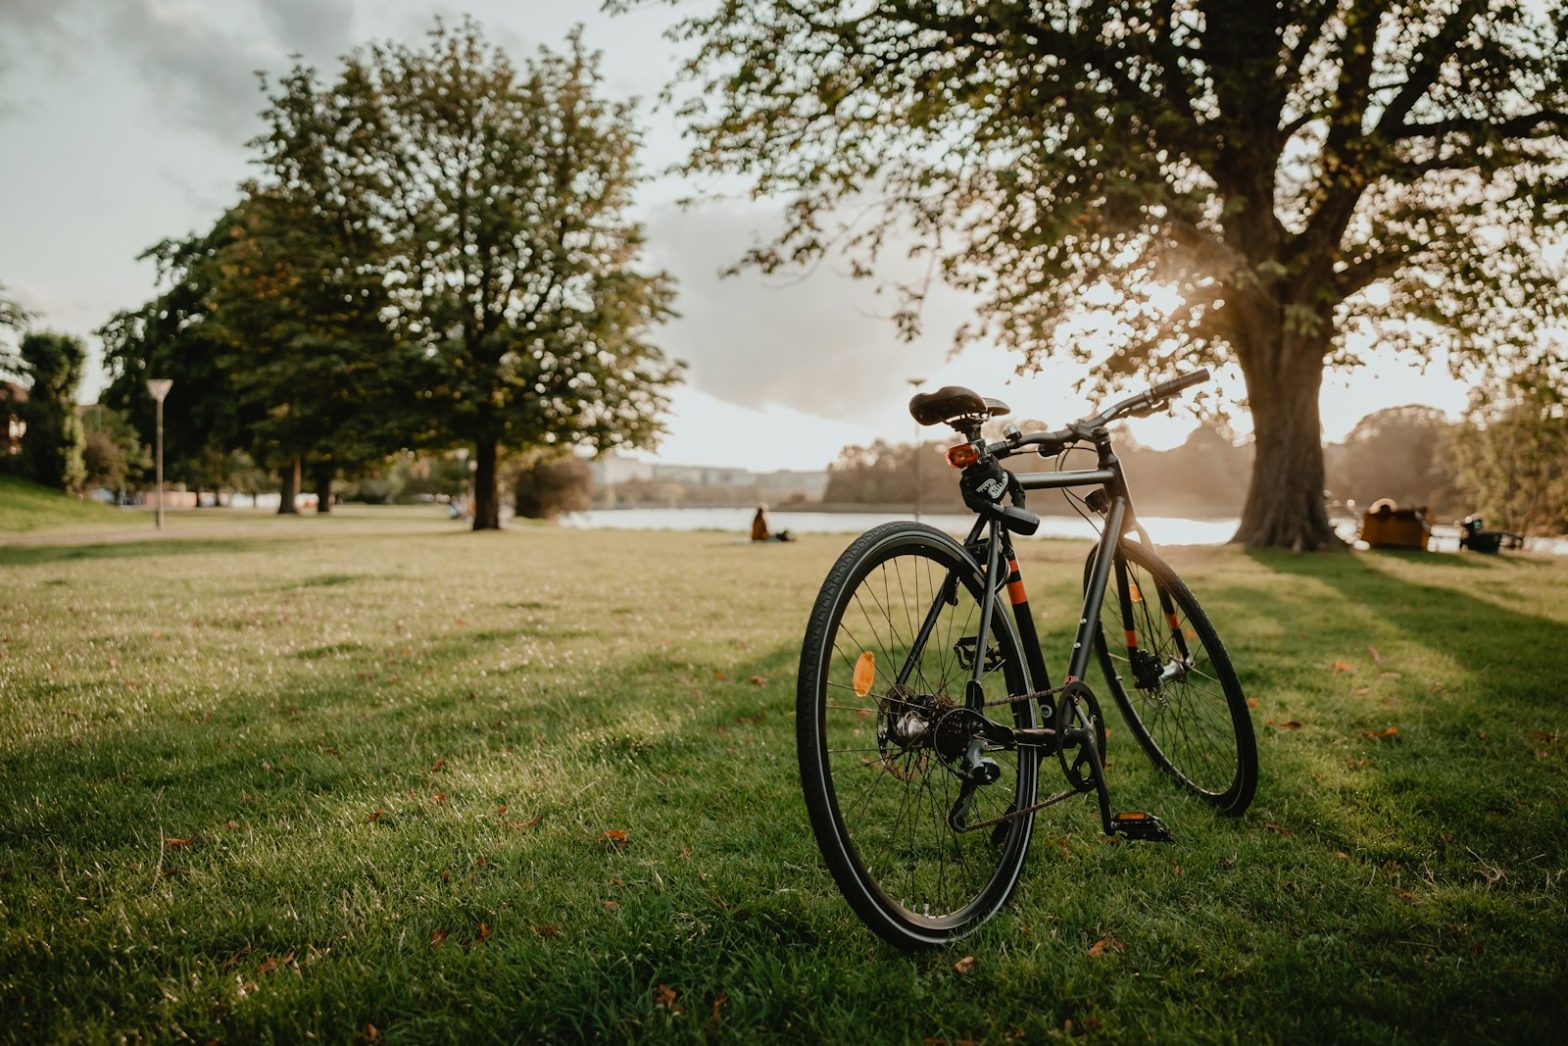 black bike on green field near trees and body of water